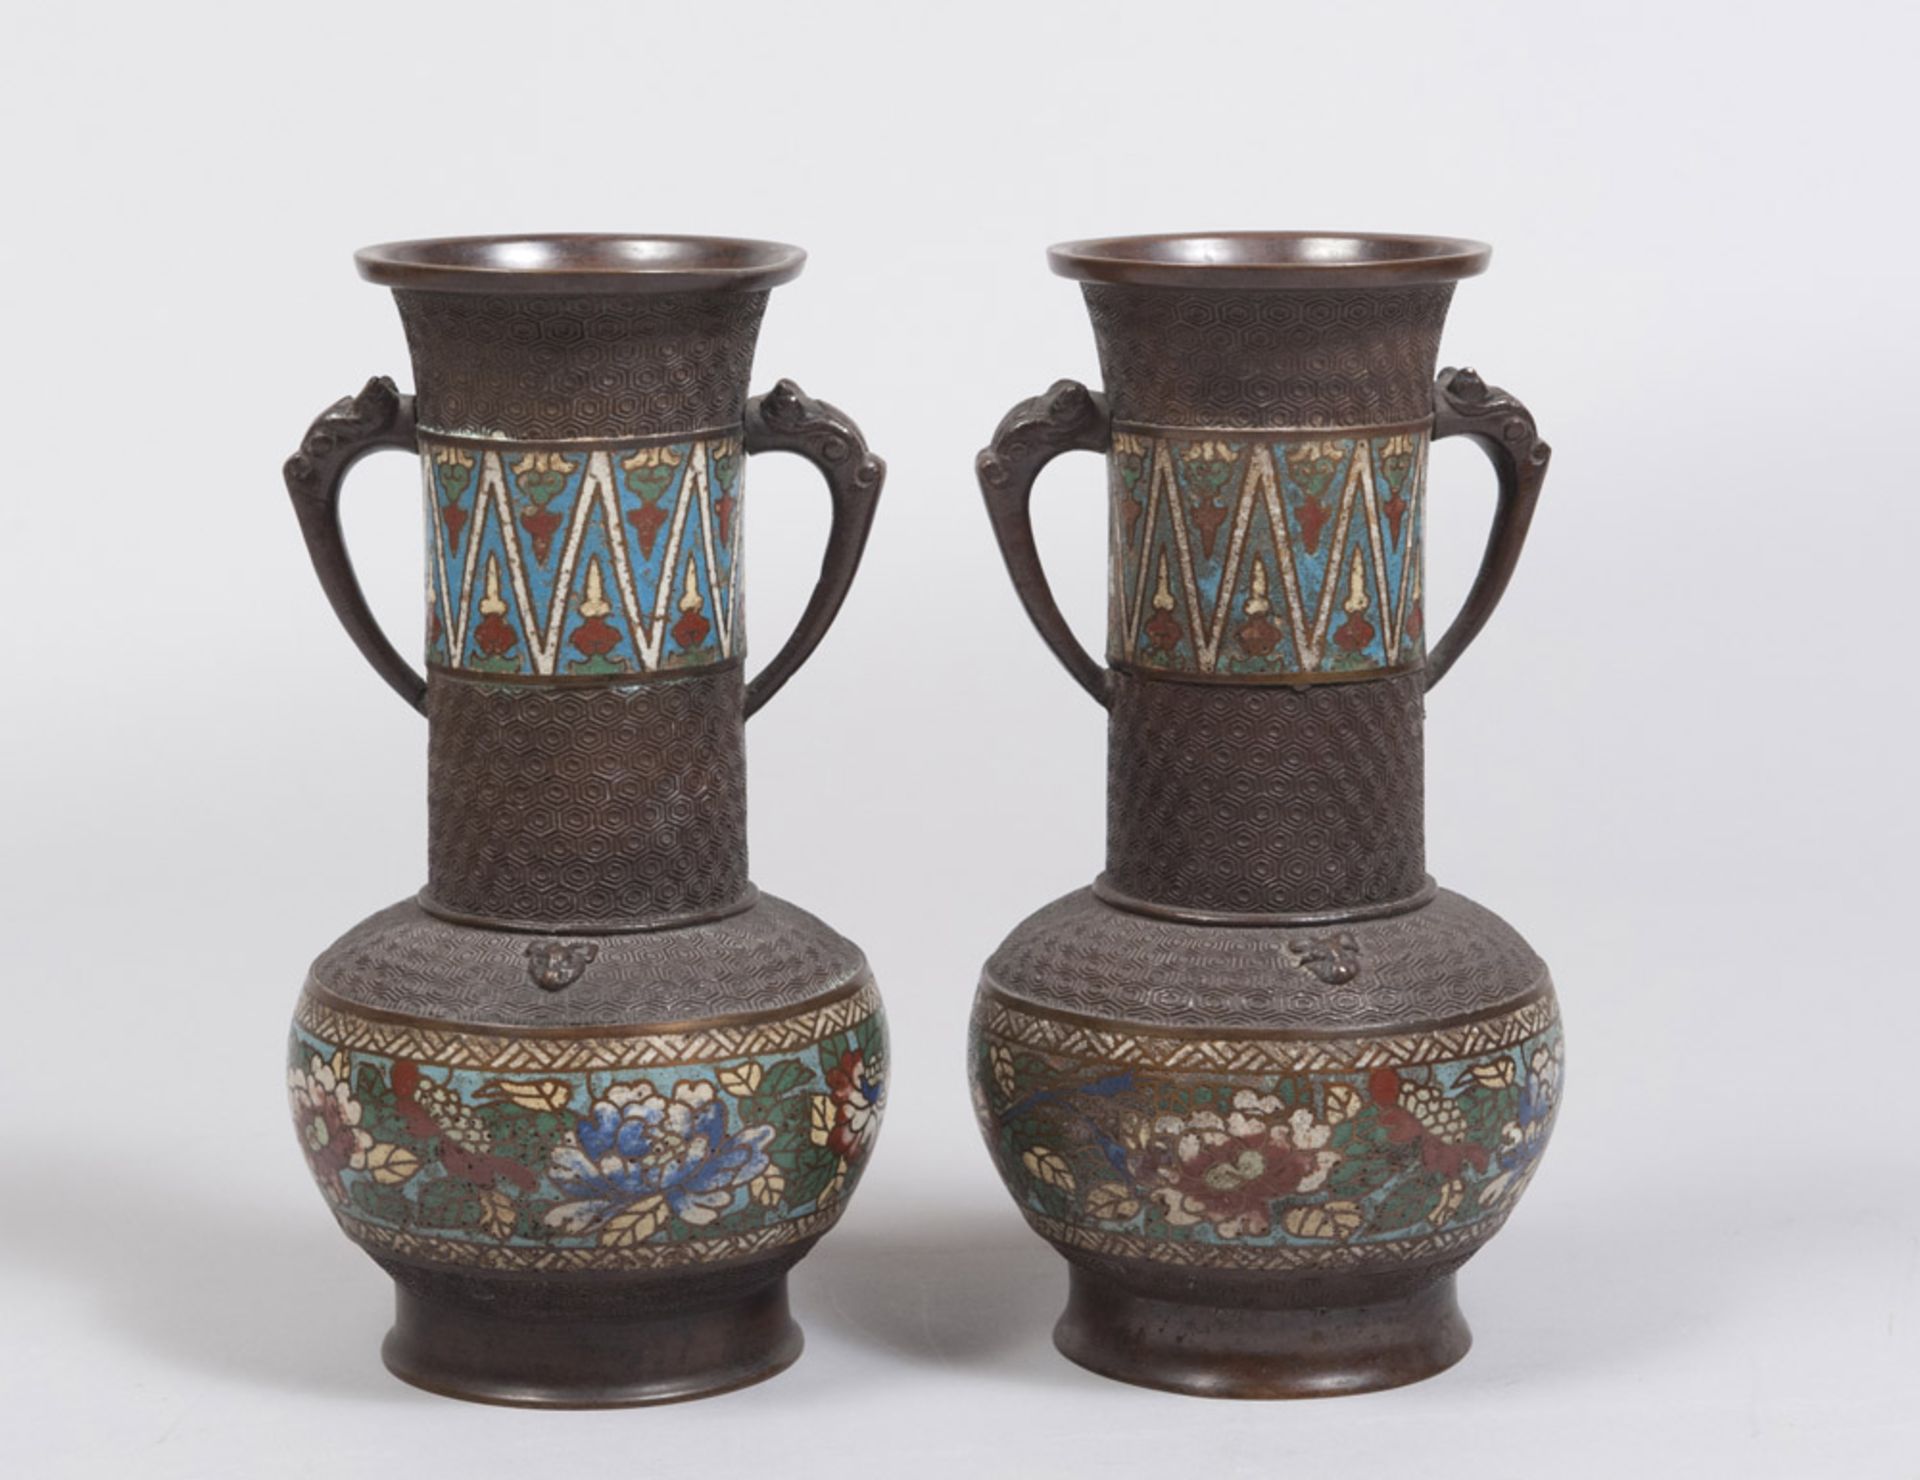 A pair of Chinese cloisonnè bronze vases. Early 20th century. Measures cm. 28 x 15. COPPIA DI VASI